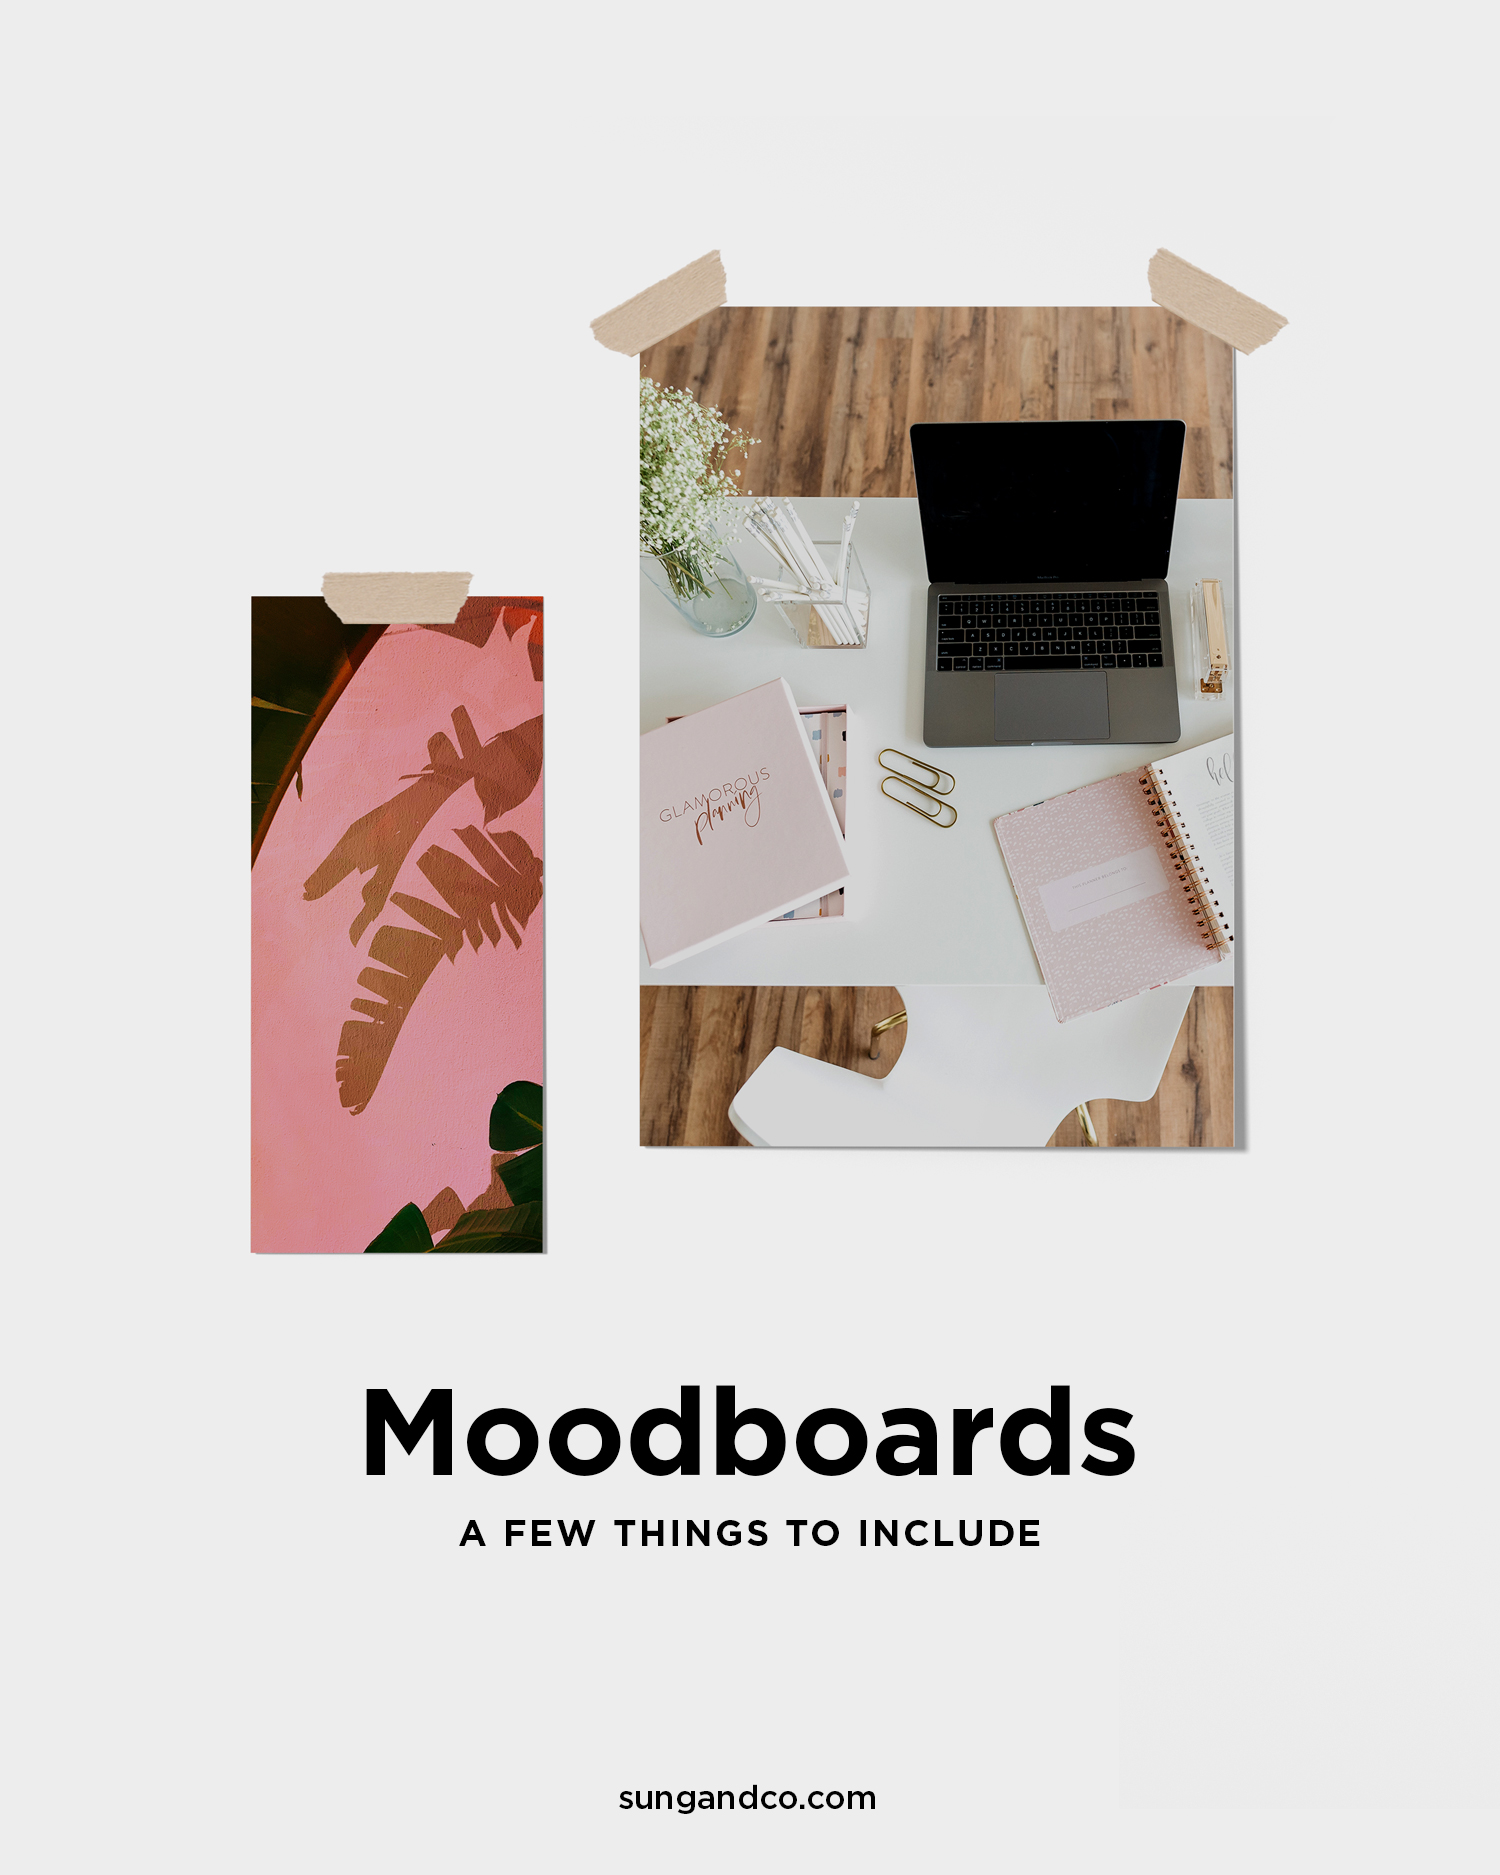 What to include when creating a moodboard.